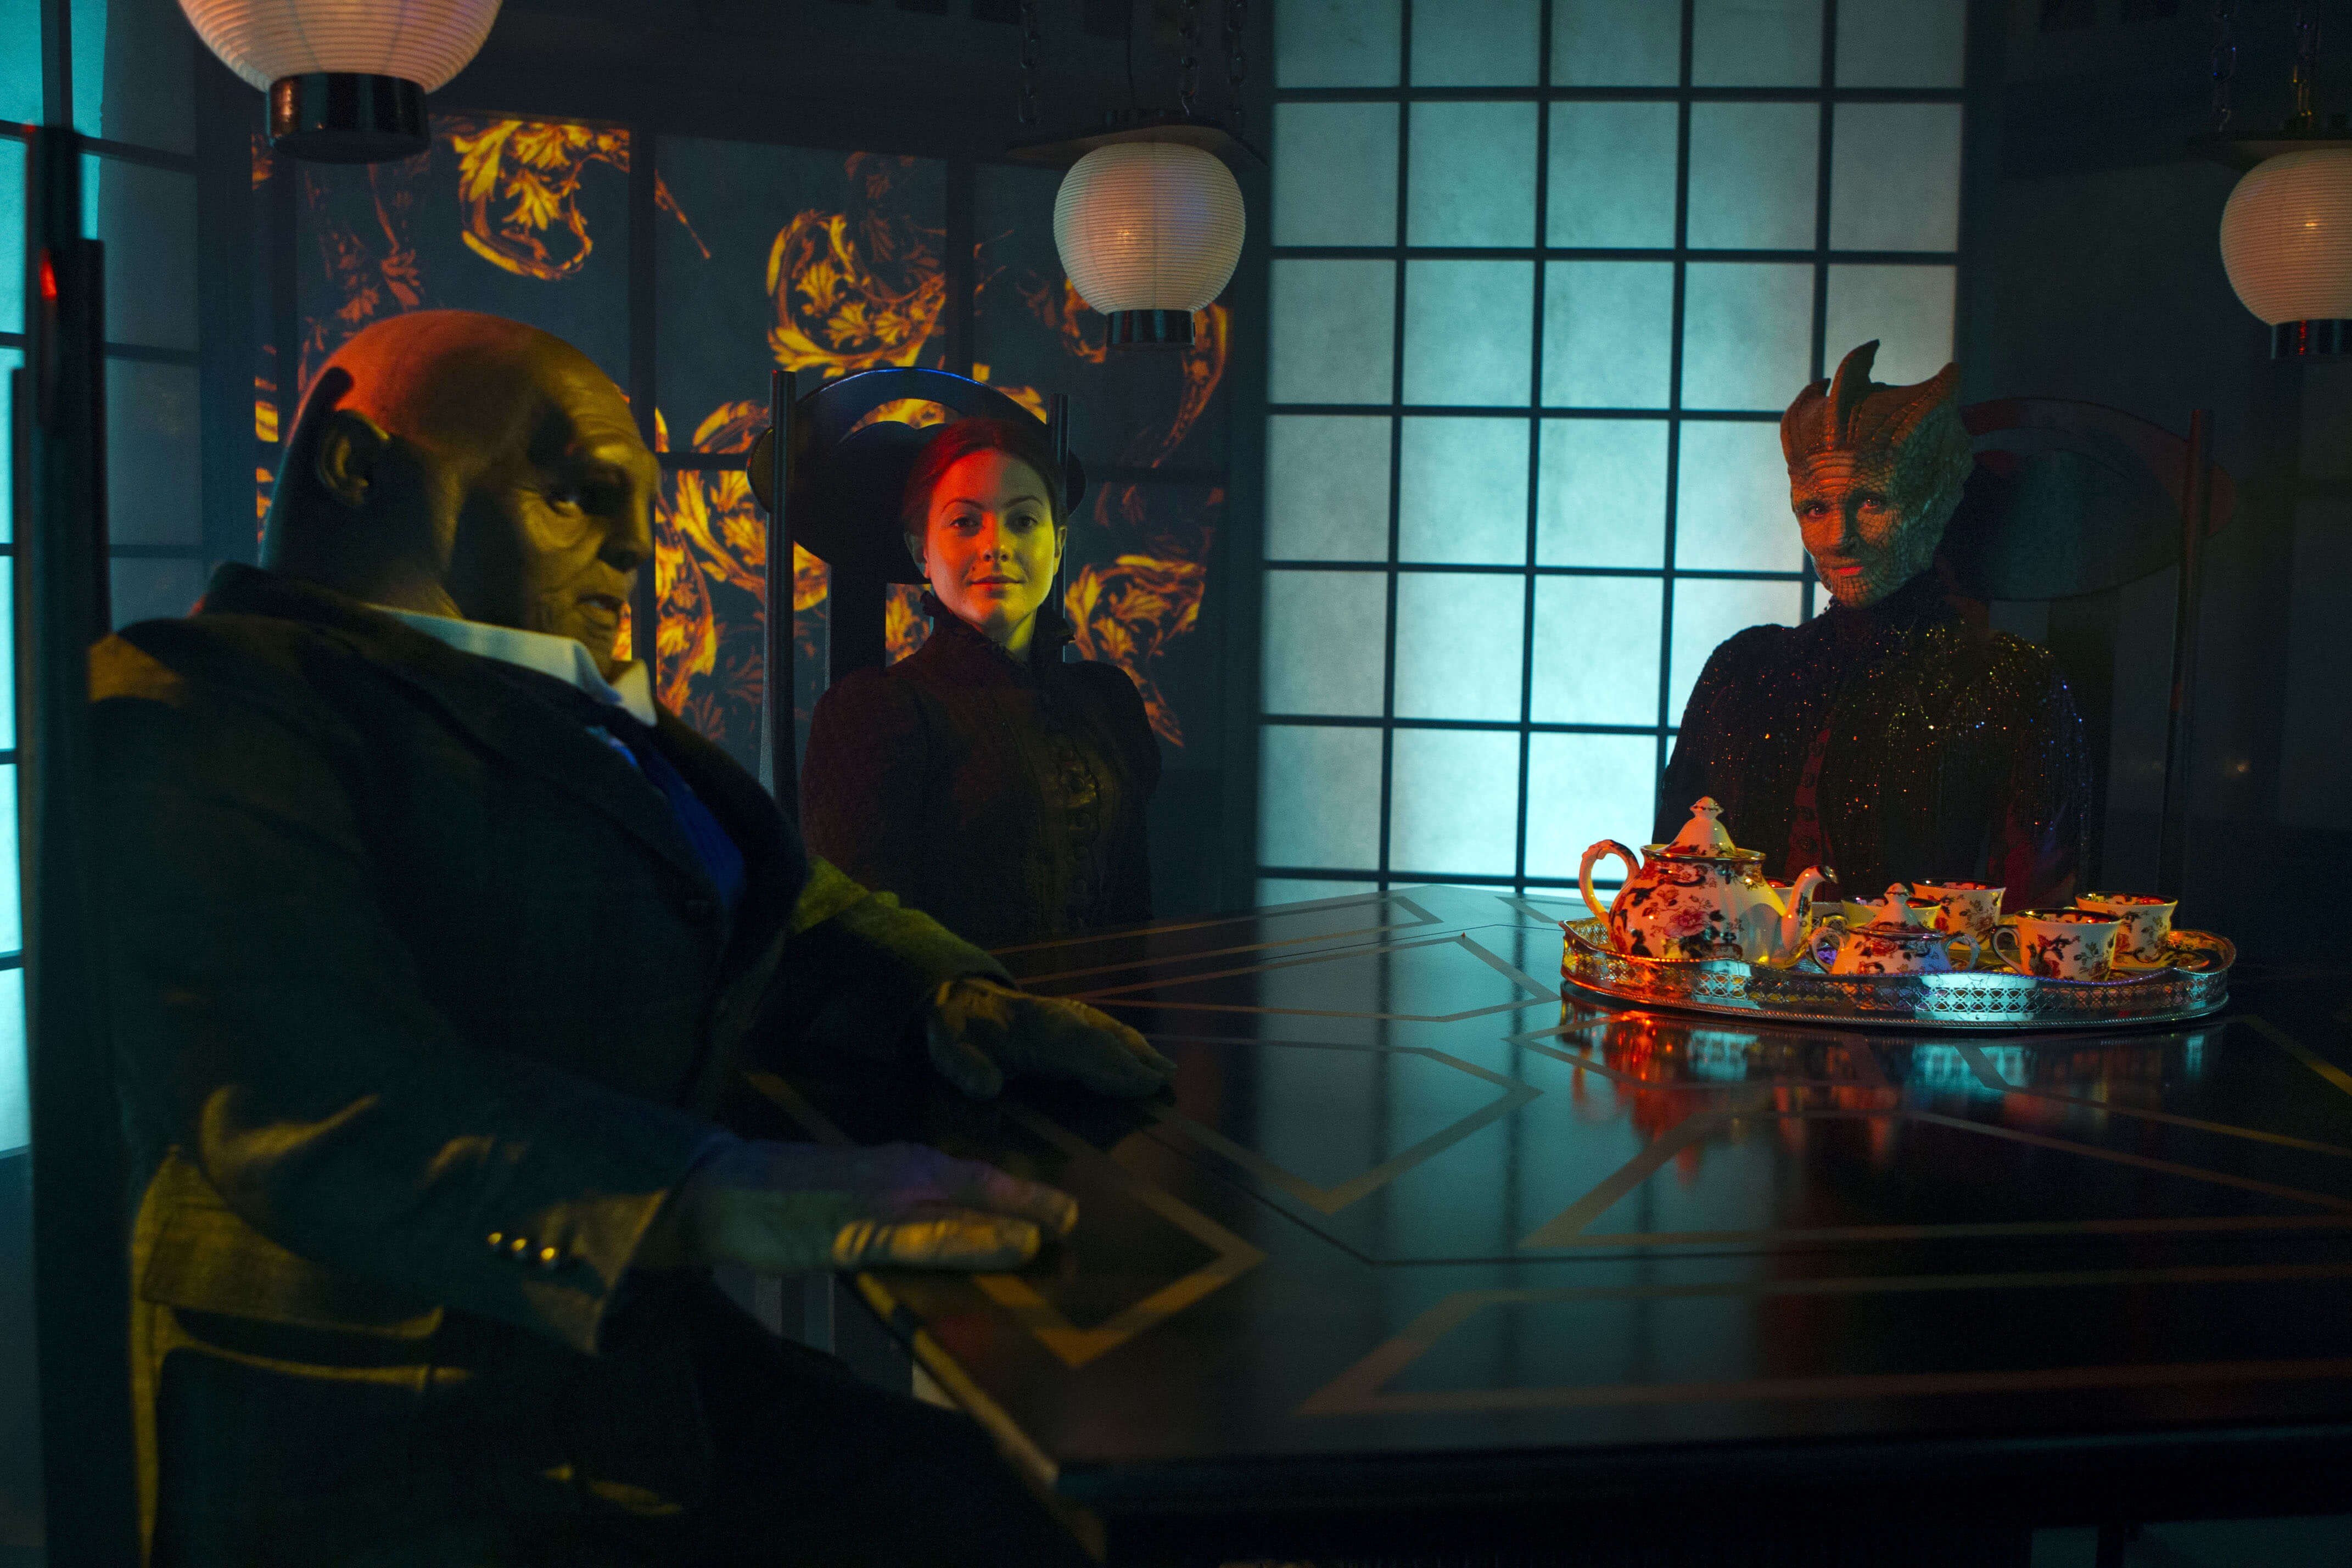 dan starkey as strax, catrin stewart as jenny and neve mcintosh as madame vastra in the name of the doctor (2013).